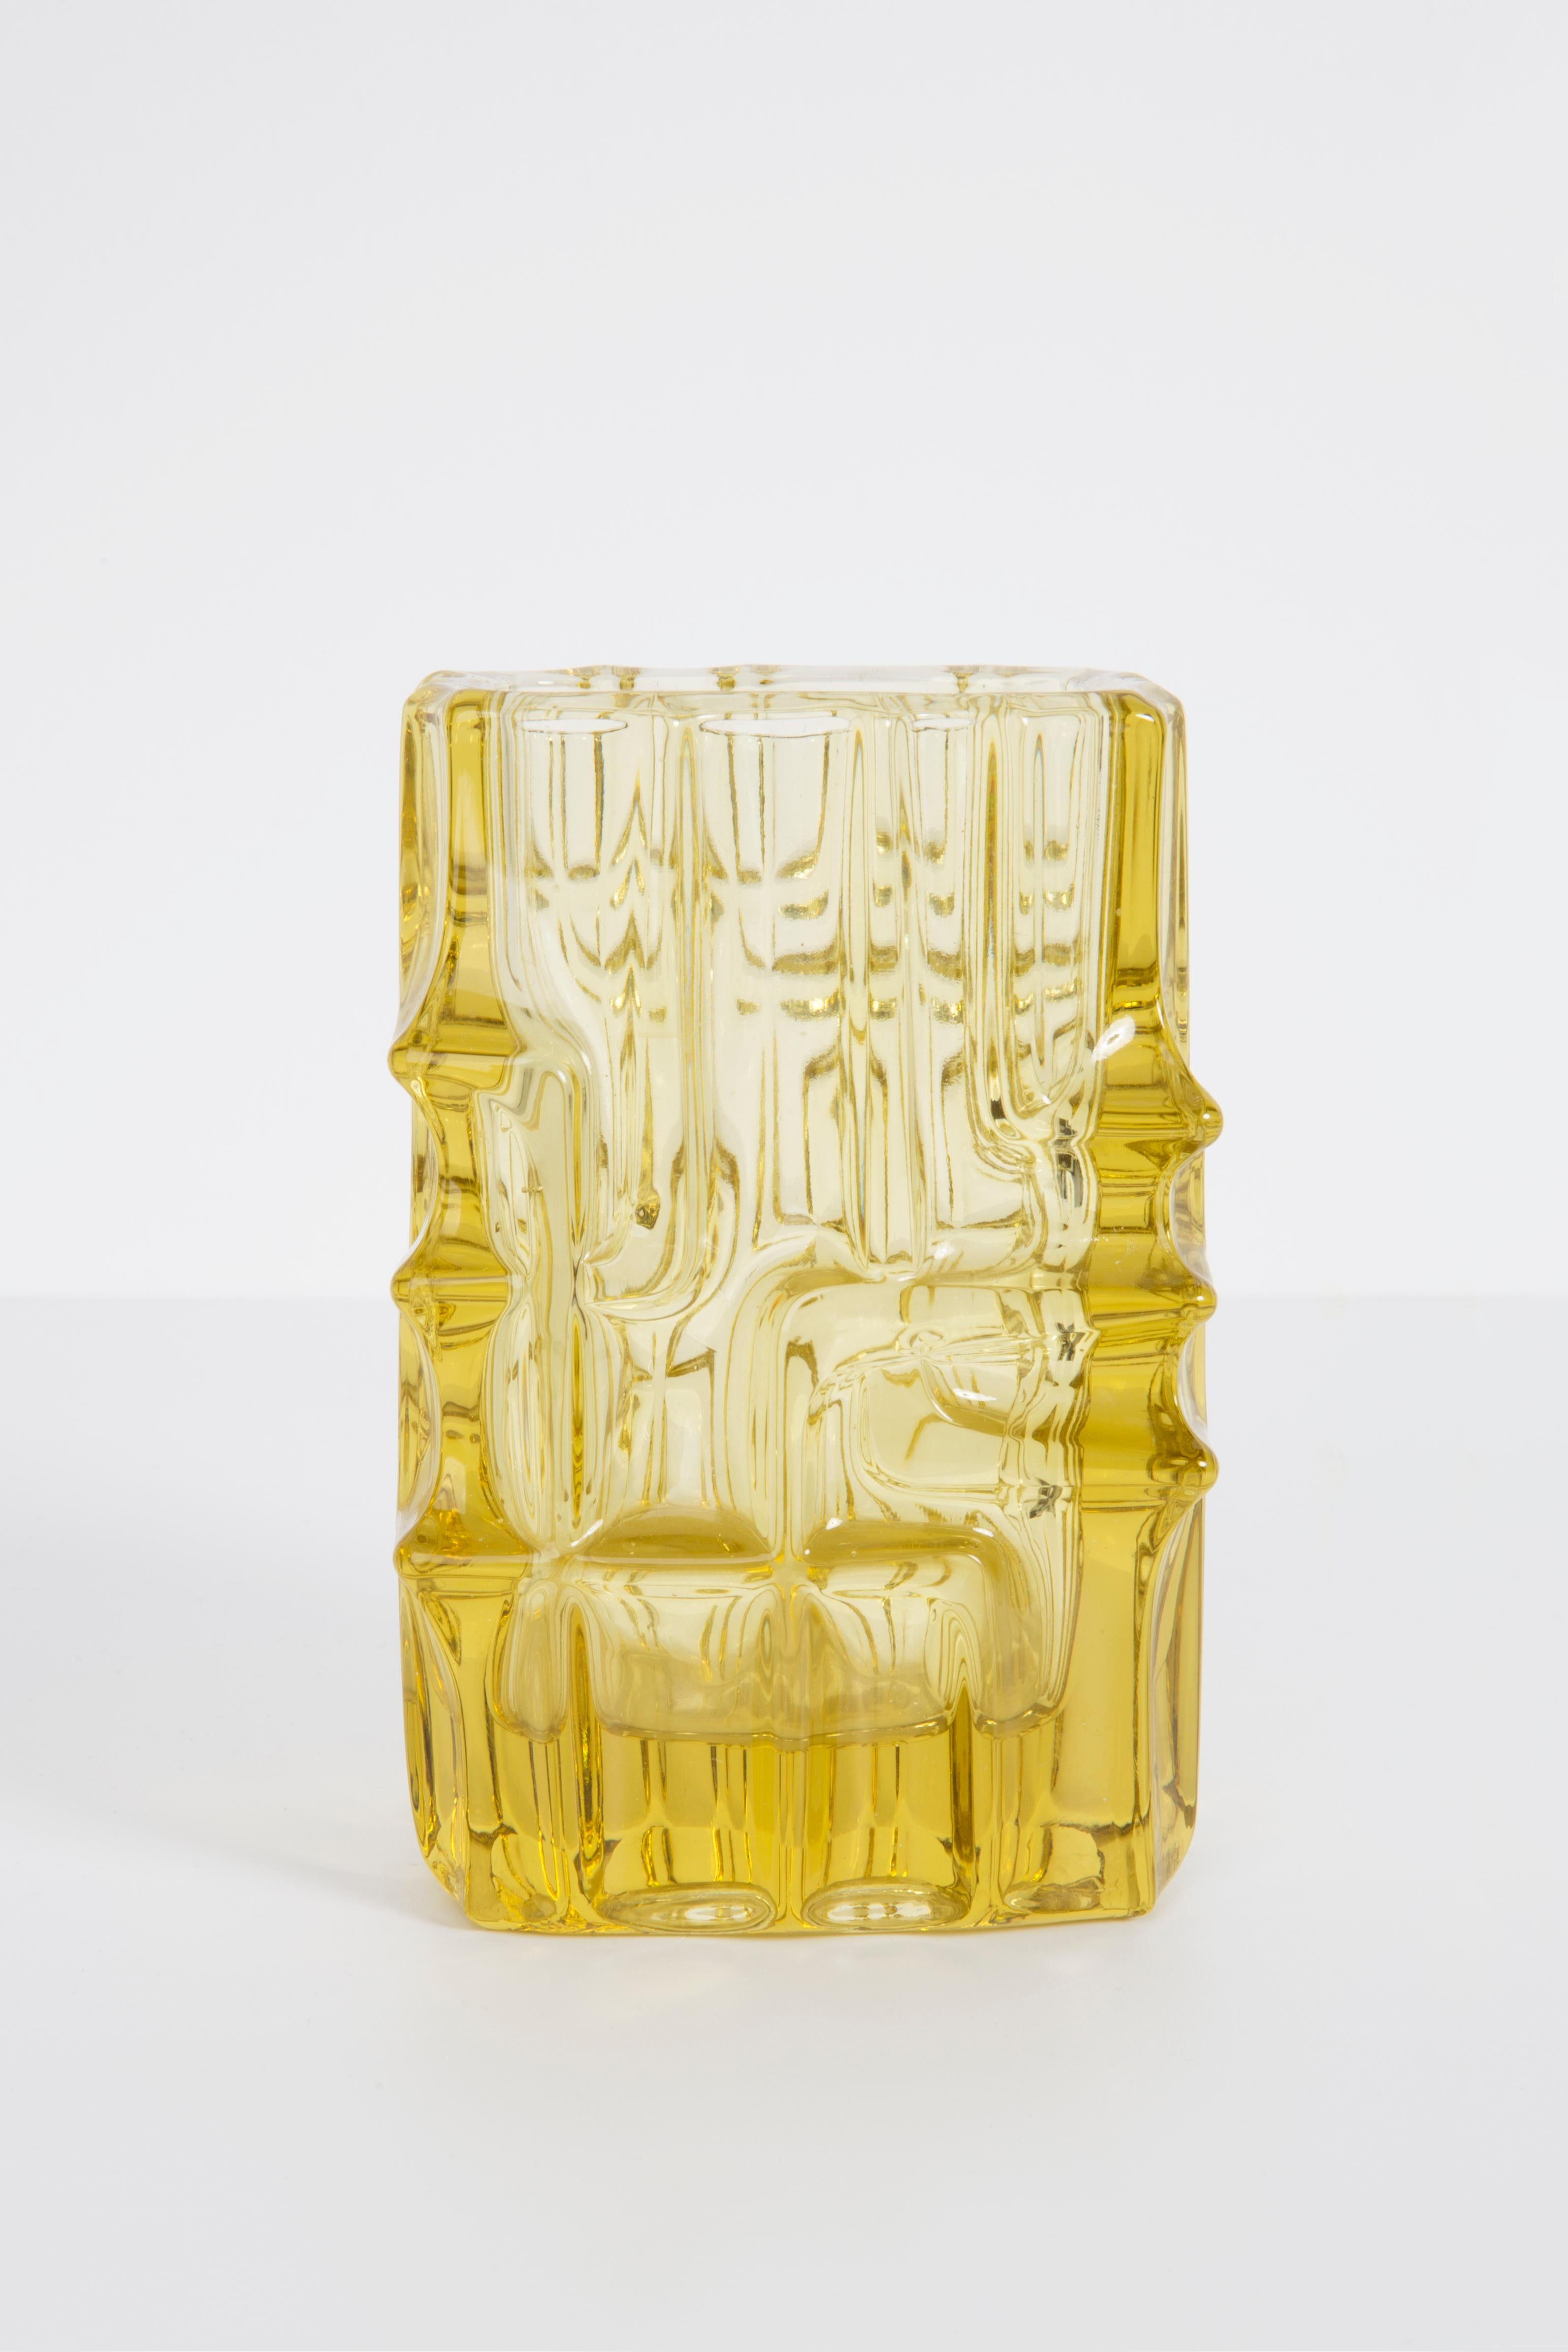 Light yellow vase by Vladislav Urban, Czechoslovakian glass designer. Produced in 1960s.
Pressed glass in perfect condition. The vase looks like it has just been taken out of the box.
No jags, defects etc. The outer relief surface, the inner